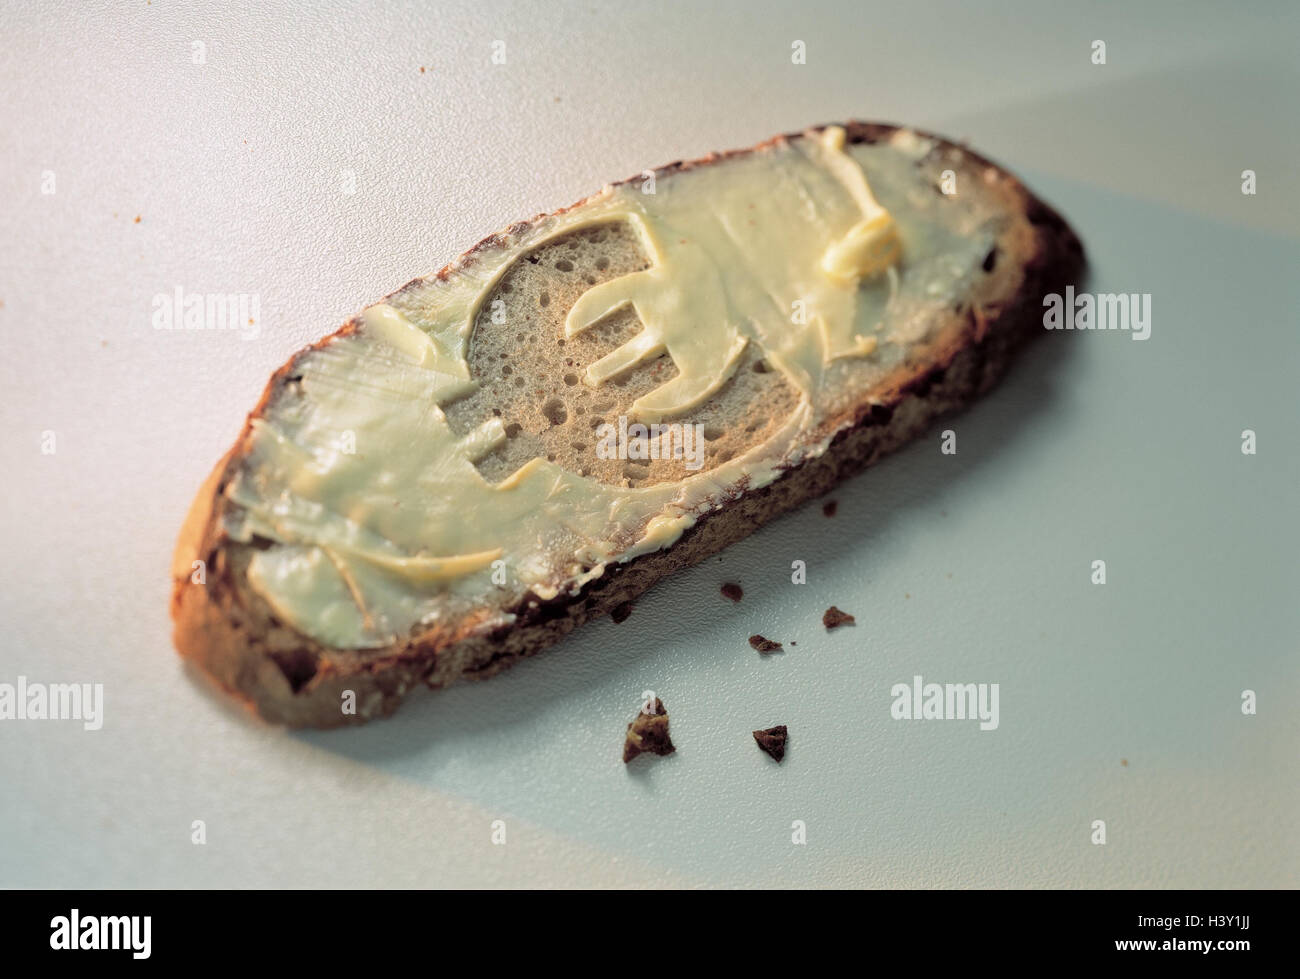 Icon, eurointroduction, slice bread, butter, euro-character, Still life, euro, currency, single currency, changeover, the EU, Europe, means payment, food, eat, price incline, price reduction, spread, studio Stock Photo